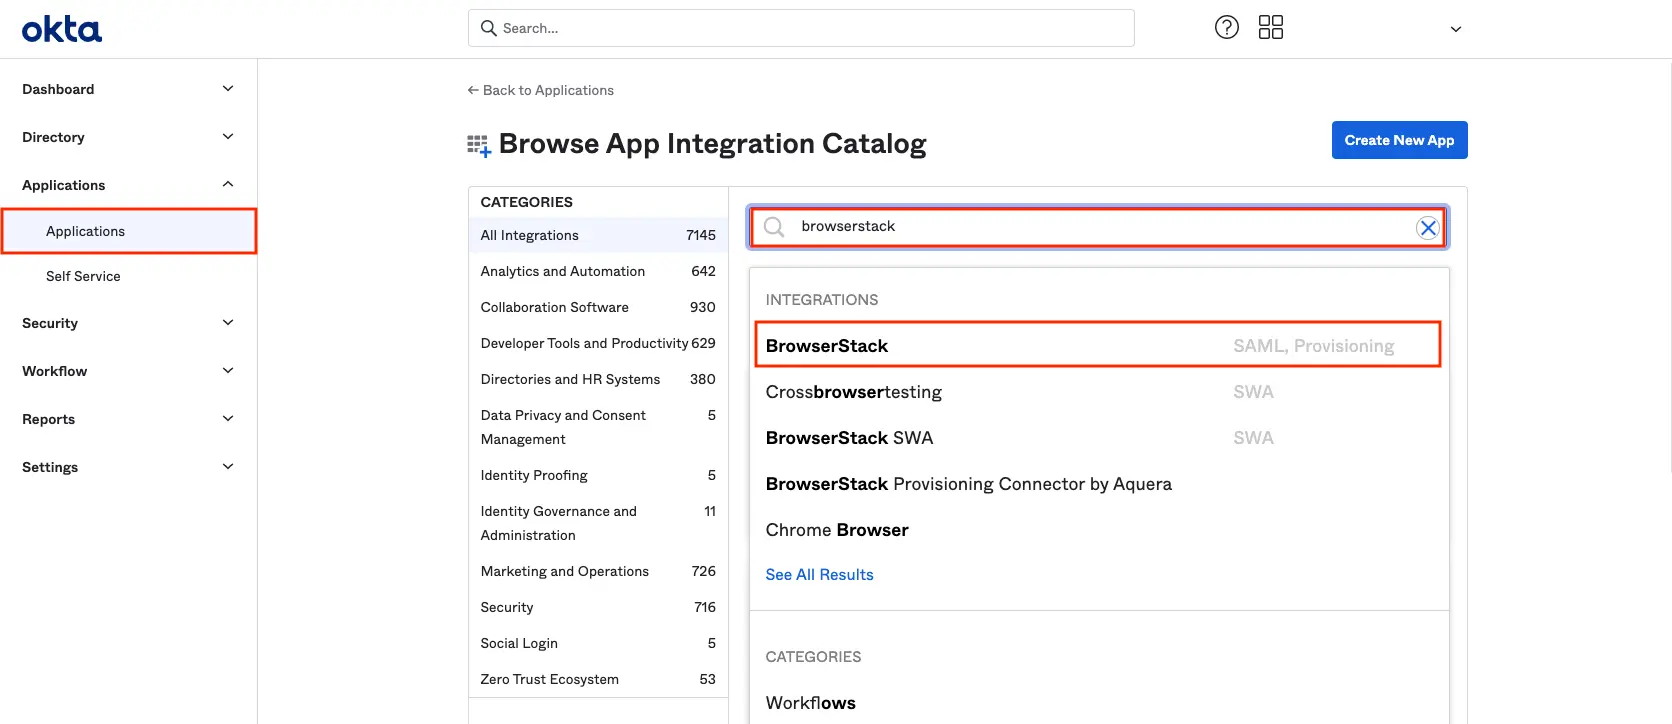 Find browserStack app under applications on okta and add it to your okta tenant